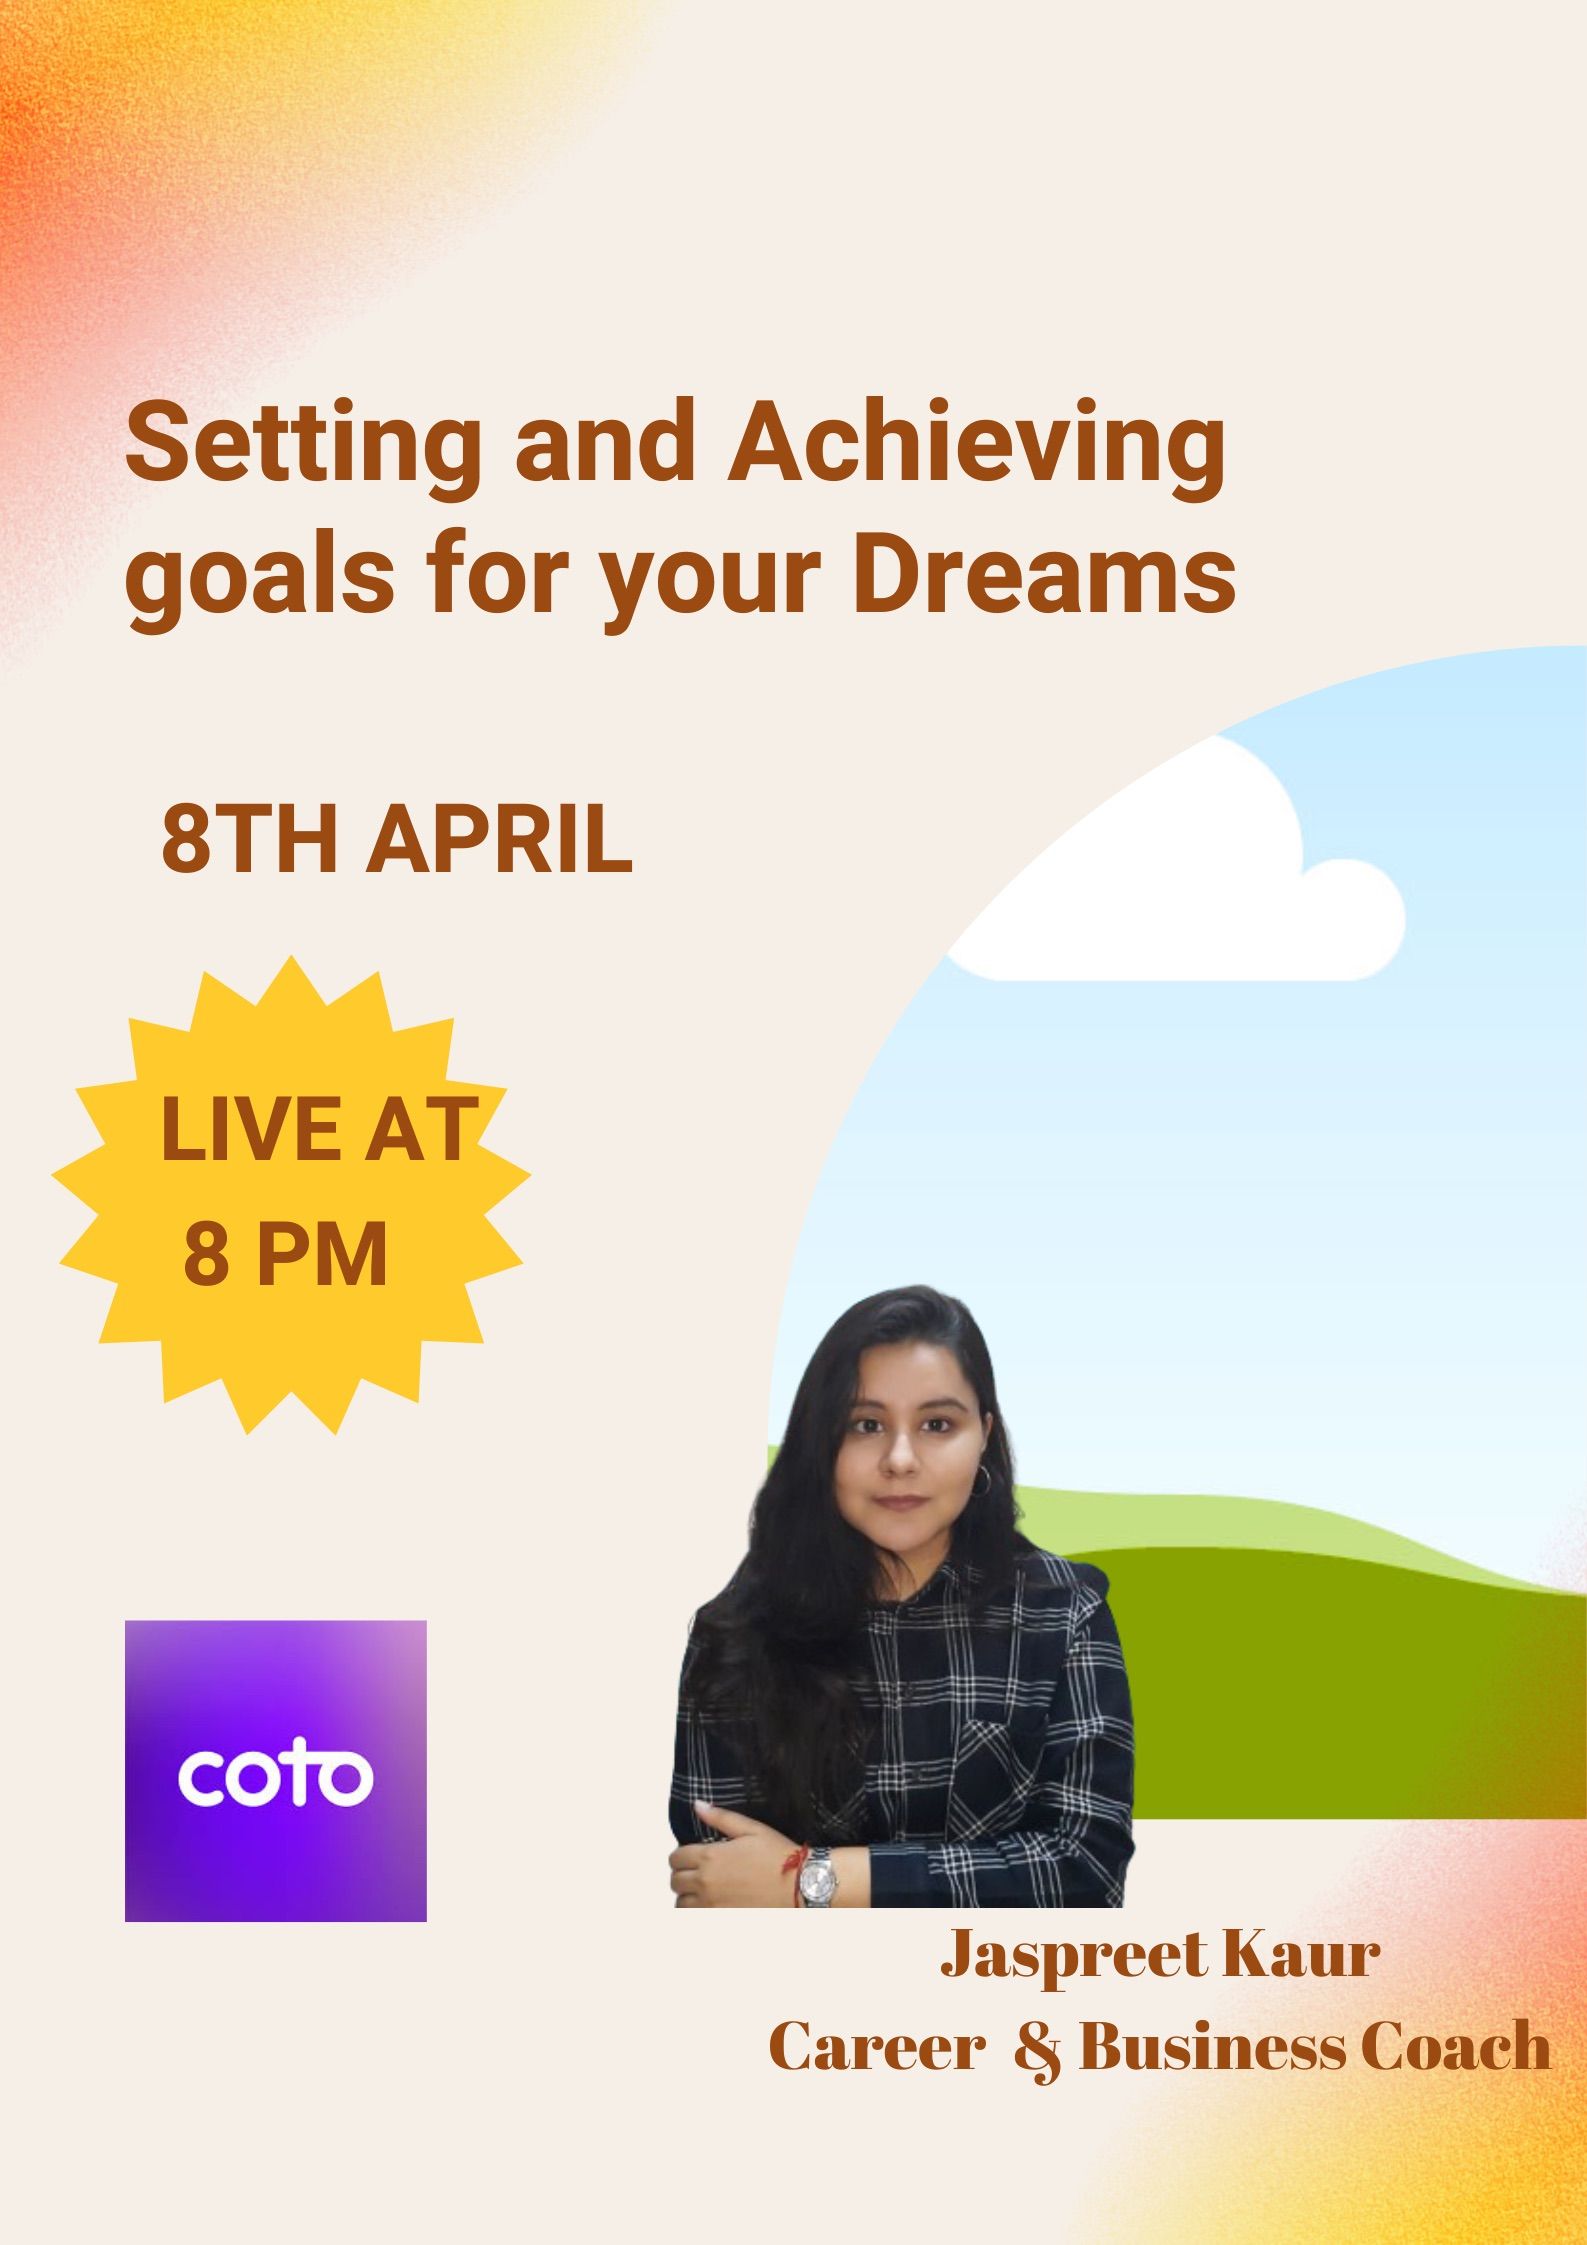 Join me live to fullfill your dreams 

Tomorrow live at 8  pm